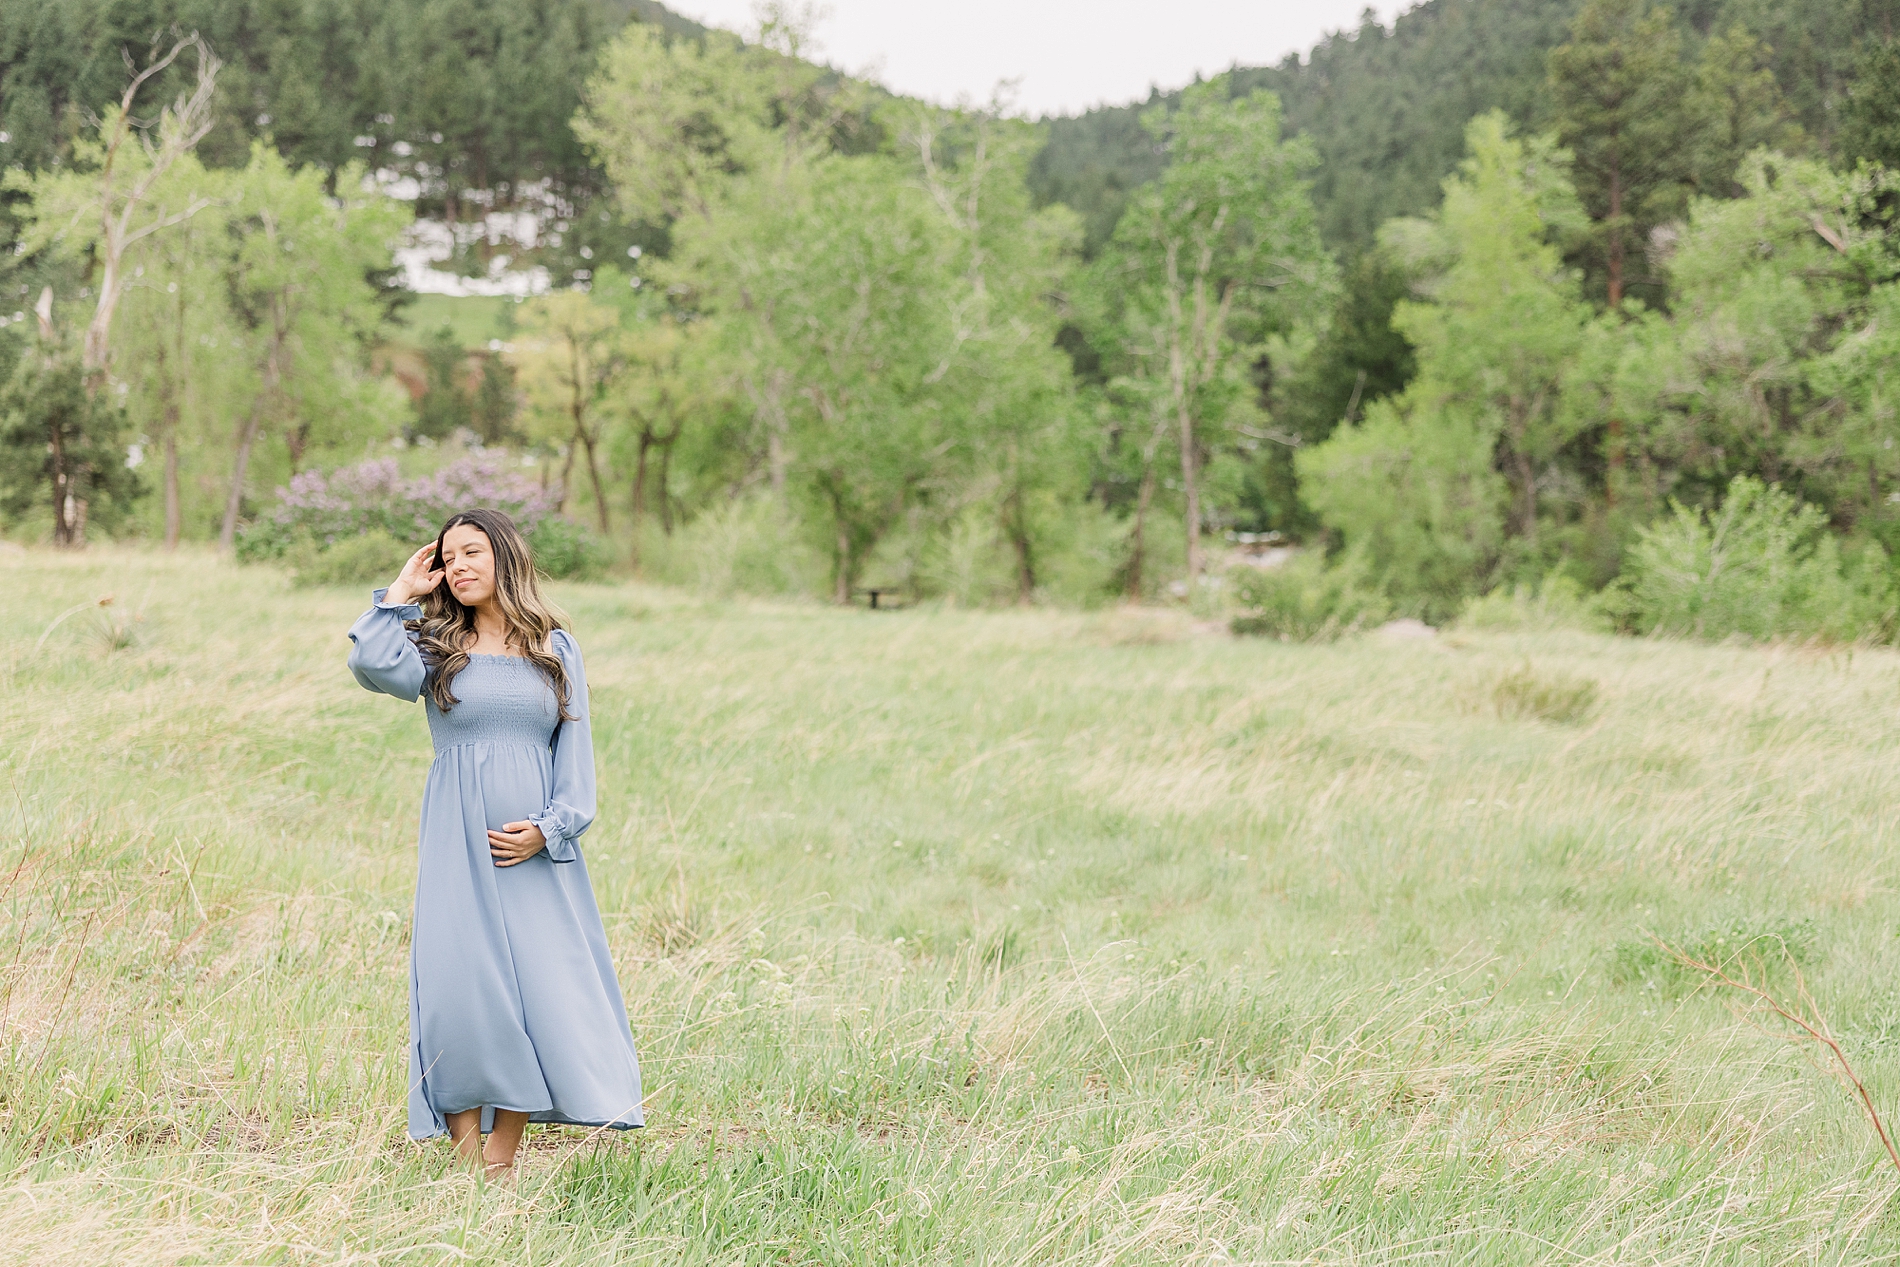 Maternity Portrait | Northern Colorado top 10 locations for family photos-Buckingham Park